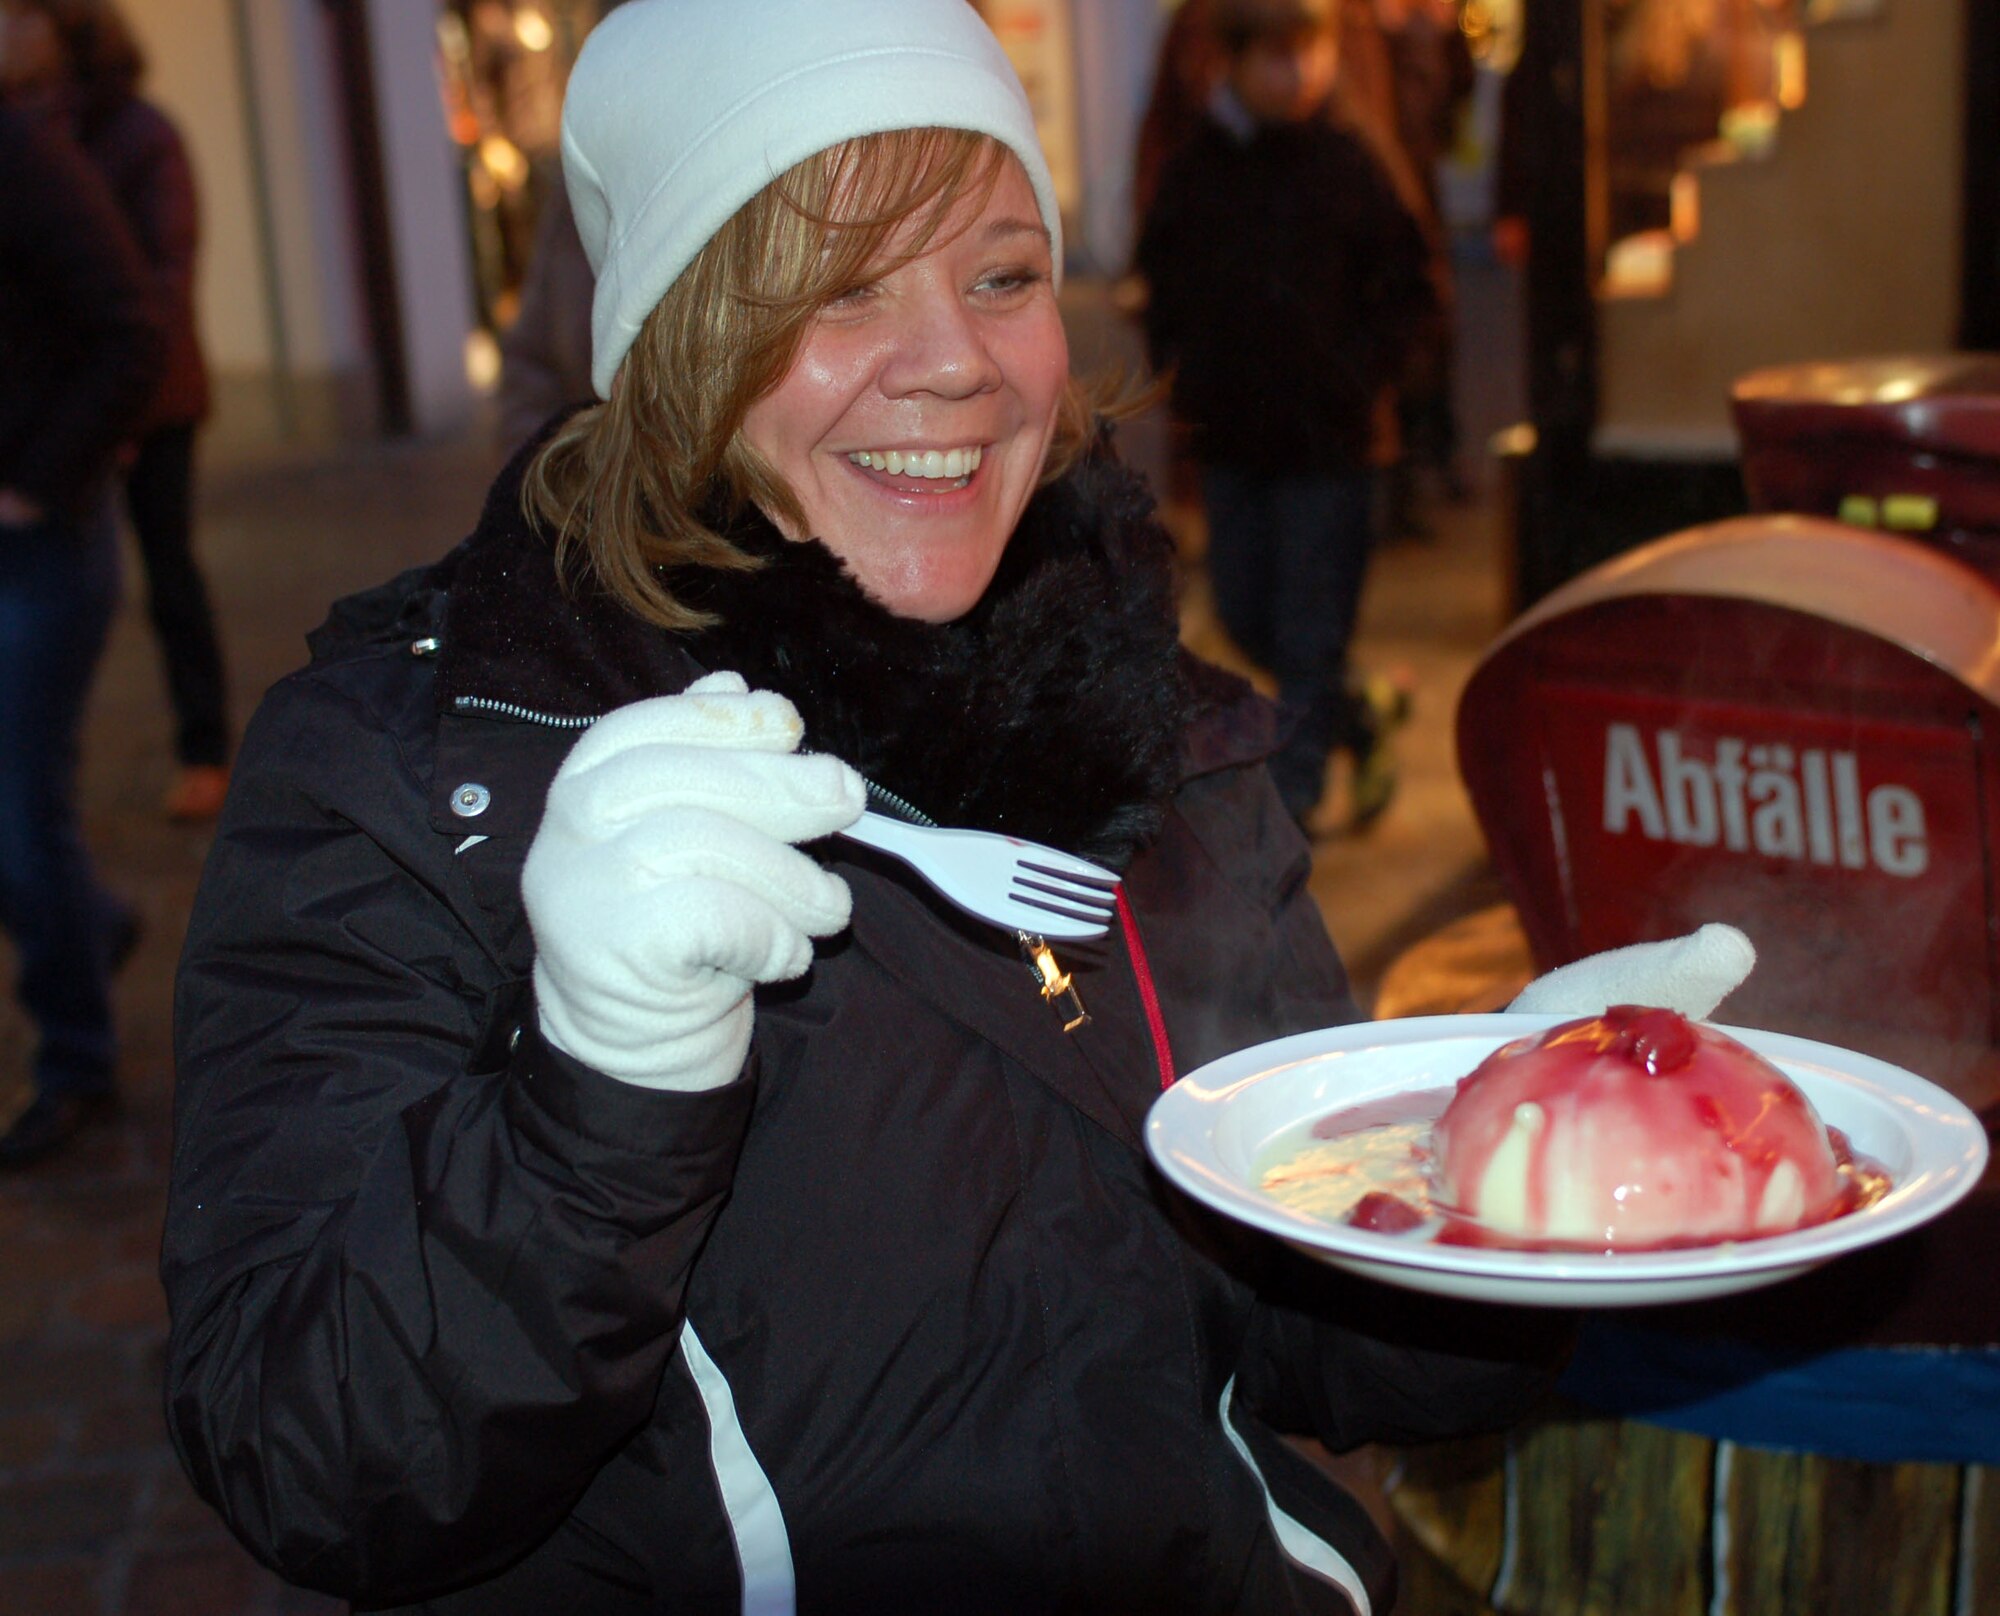 SPANGDAHLEM AIR BASE, Germany – A visitor enjoys a Dampfnudel, or steamed dumpling, at the Trier’s Weihnachtsmarkt Dec. 8 in the main market square in Trier. Steamed dumplings with warm cherries and vanilla sauce is a popular, traditional holiday food item in Germany. The Trier Weihnachtsmarkt is going on now through Dec. 22. Opening times are 10:30 a.m. - 8:30 p.m. Monday through Wednesday, 10:30 a.m. - 9:30 p.m. Thursday through Saturday, and 11 a.m. - 8:30 p.m. Sunday. Highlights include a performance by the U.S. Air Forces in Europe Brass Band from 6 - 7 p.m. Dec. 13. Music and entertainment is scheduled throughout each weekend, and Sankt Nikolaus will visit often. (U.S. Air Force photo/Iris Reiff)